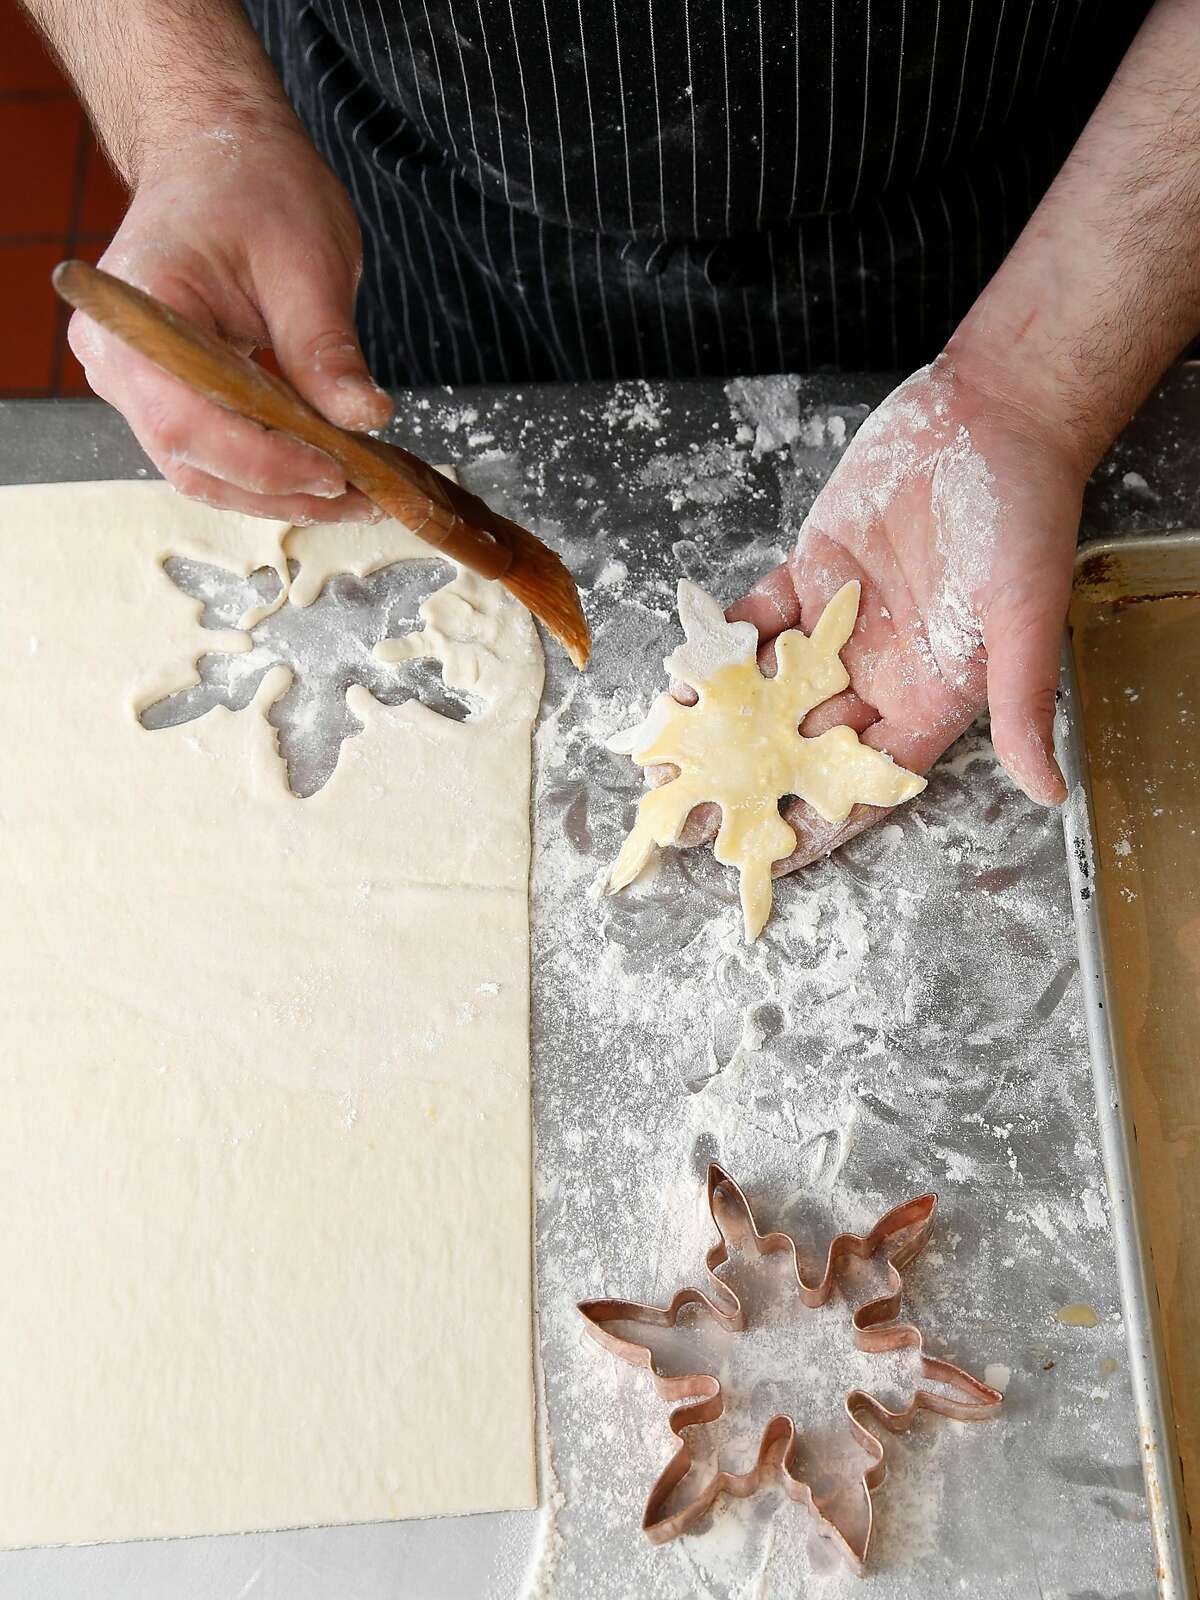 Chef Blake Askew makes snowflake decorations from dough for his beef wellington at Maybeck's on Tuesday, November 29, 2017, in San Francisco, Calif.